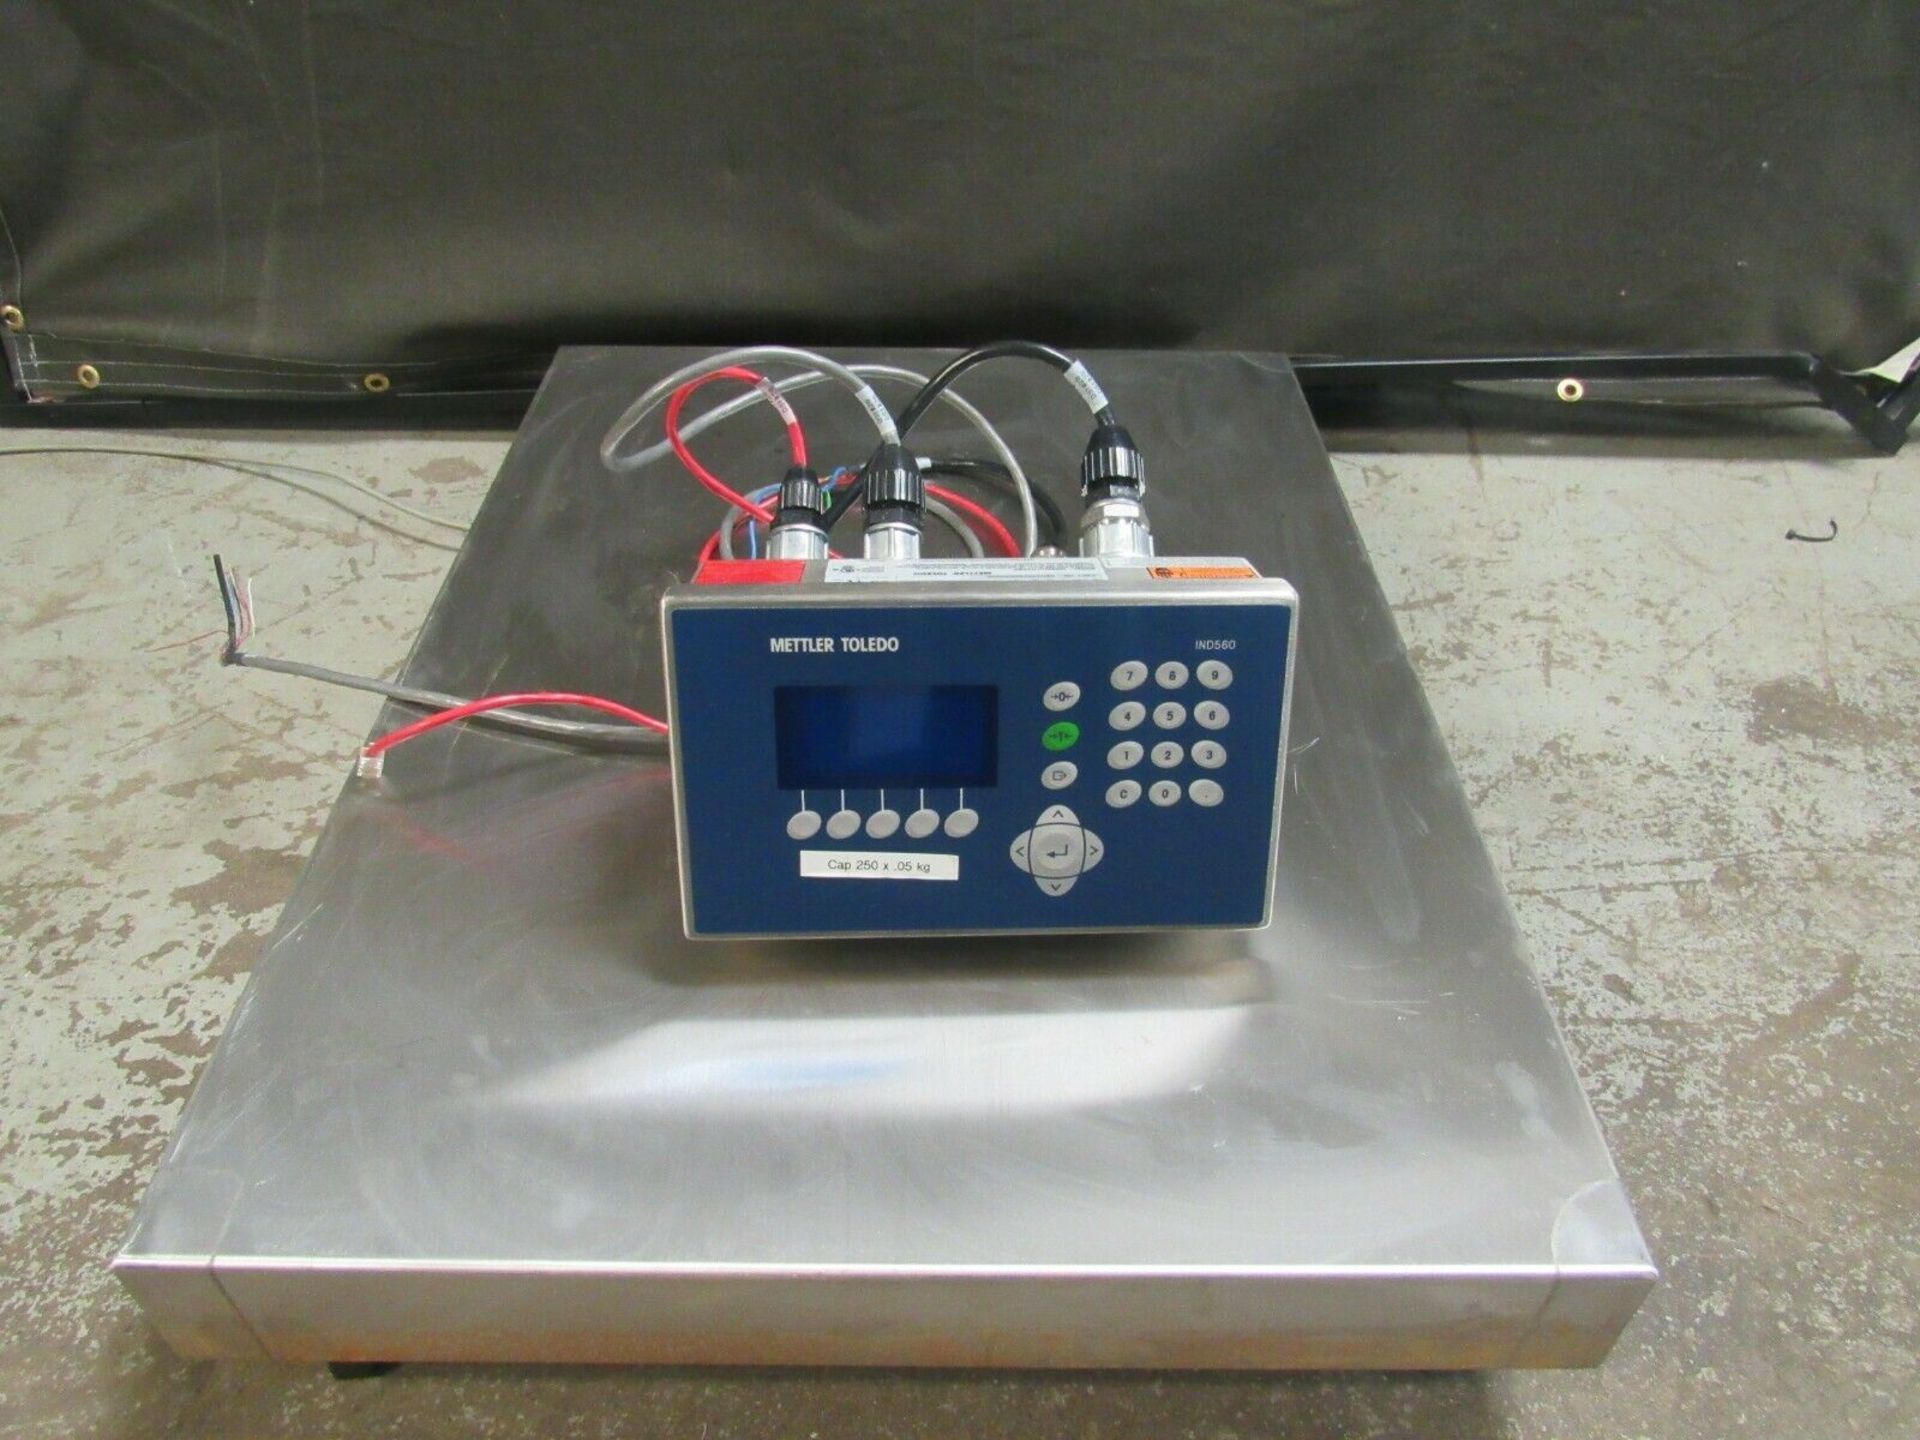 METTLER TOLEDO INDUSTRIAL WEIGHING TERMINAL & BENCH SCALE FOR HARSH ENVIRONMENTS